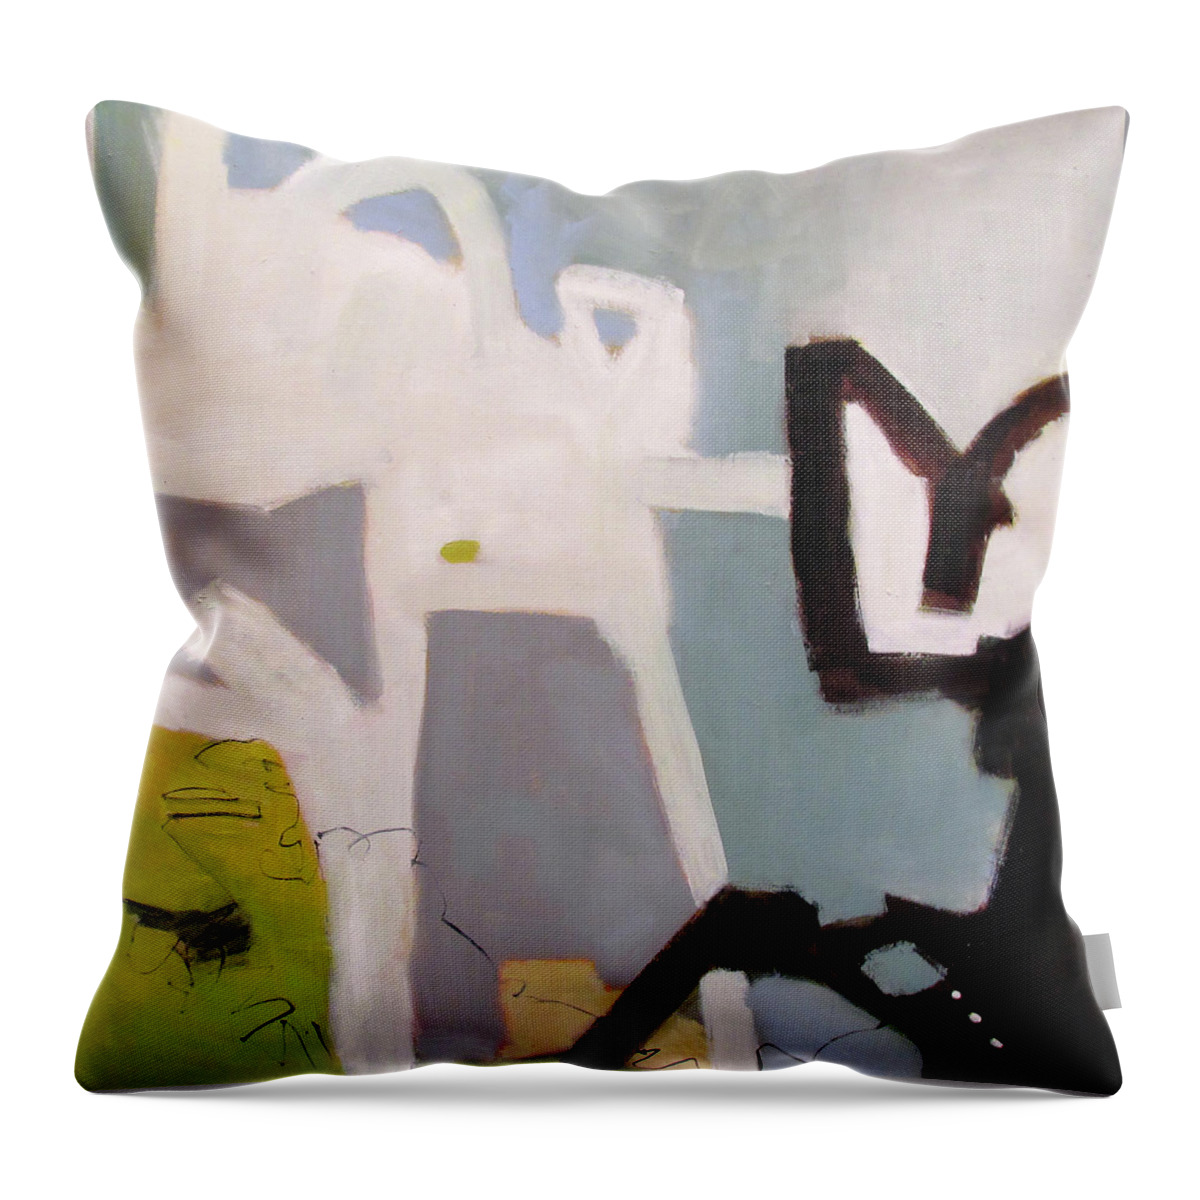 Untitled Throw Pillow featuring the painting Untitled by Chris Gholson